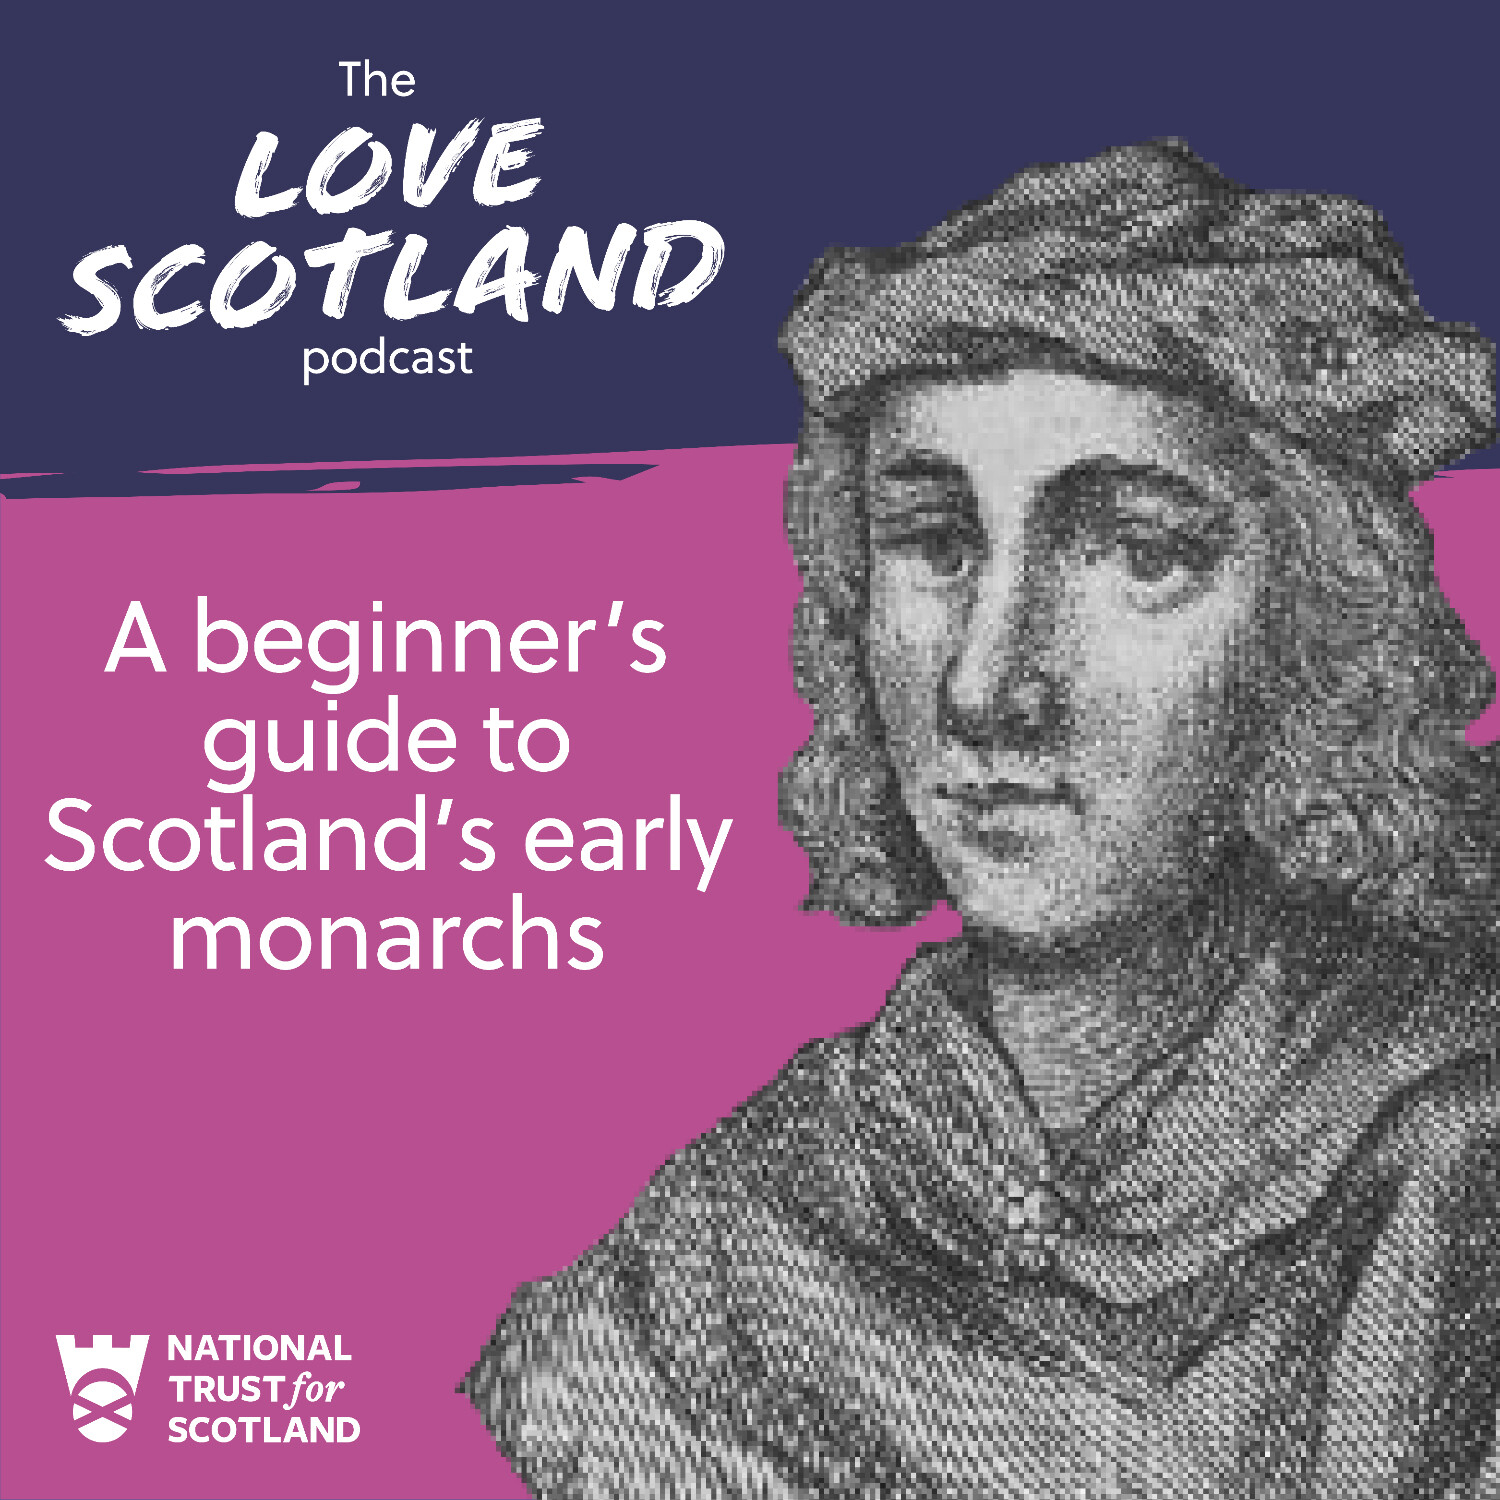 A beginner’s guide to Scotland’s early monarchs